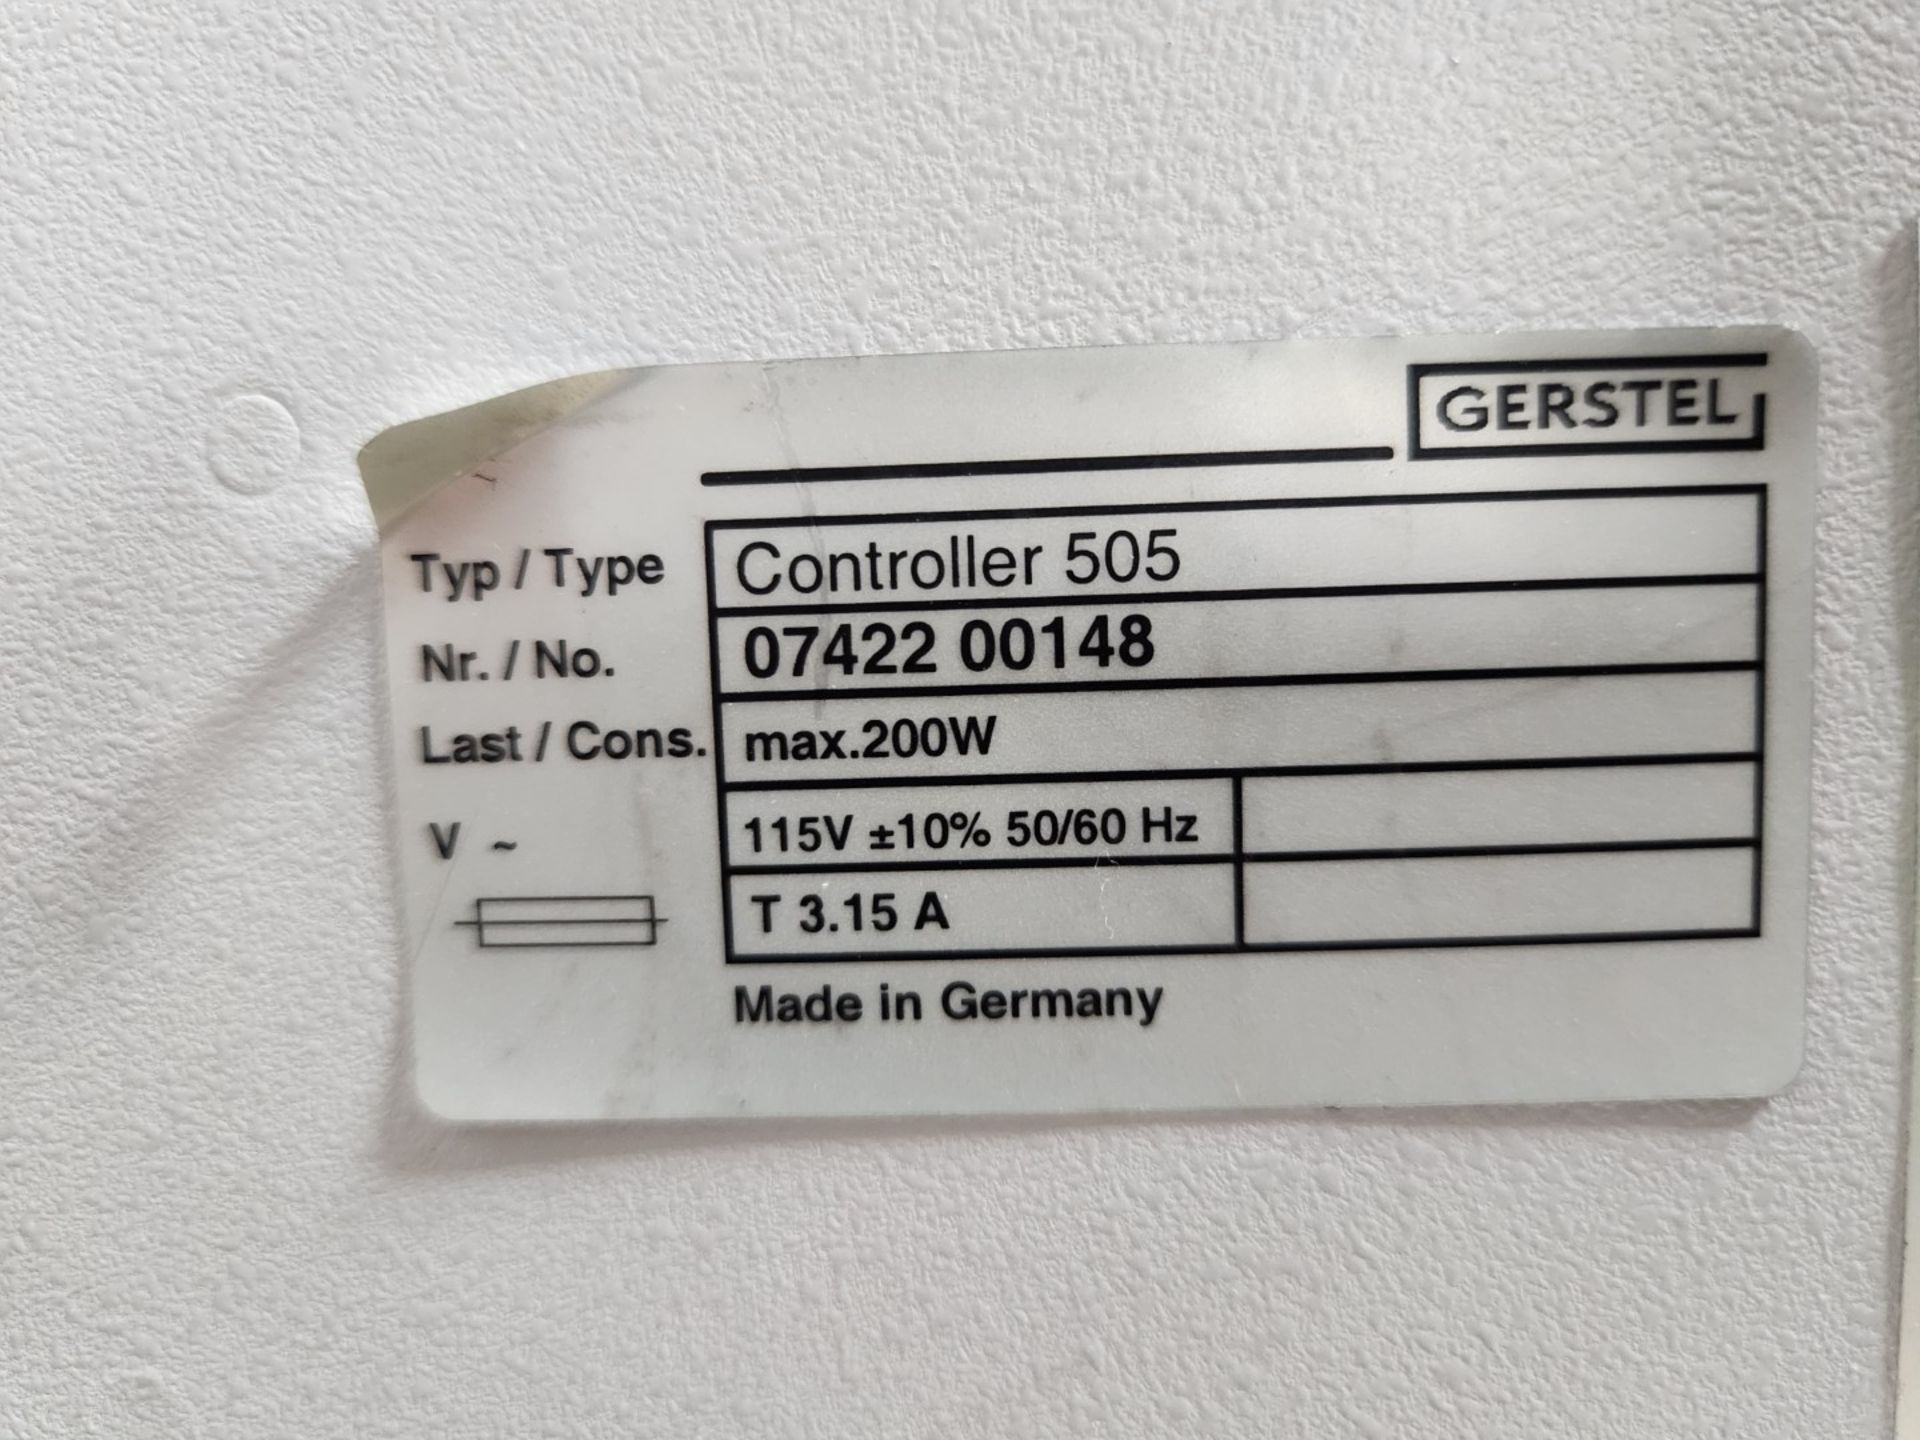 Gerstel Controller, model 505, max 200 watts, 115 volts, serial# 07422 00148. {TAG:1190015} - Image 4 of 4